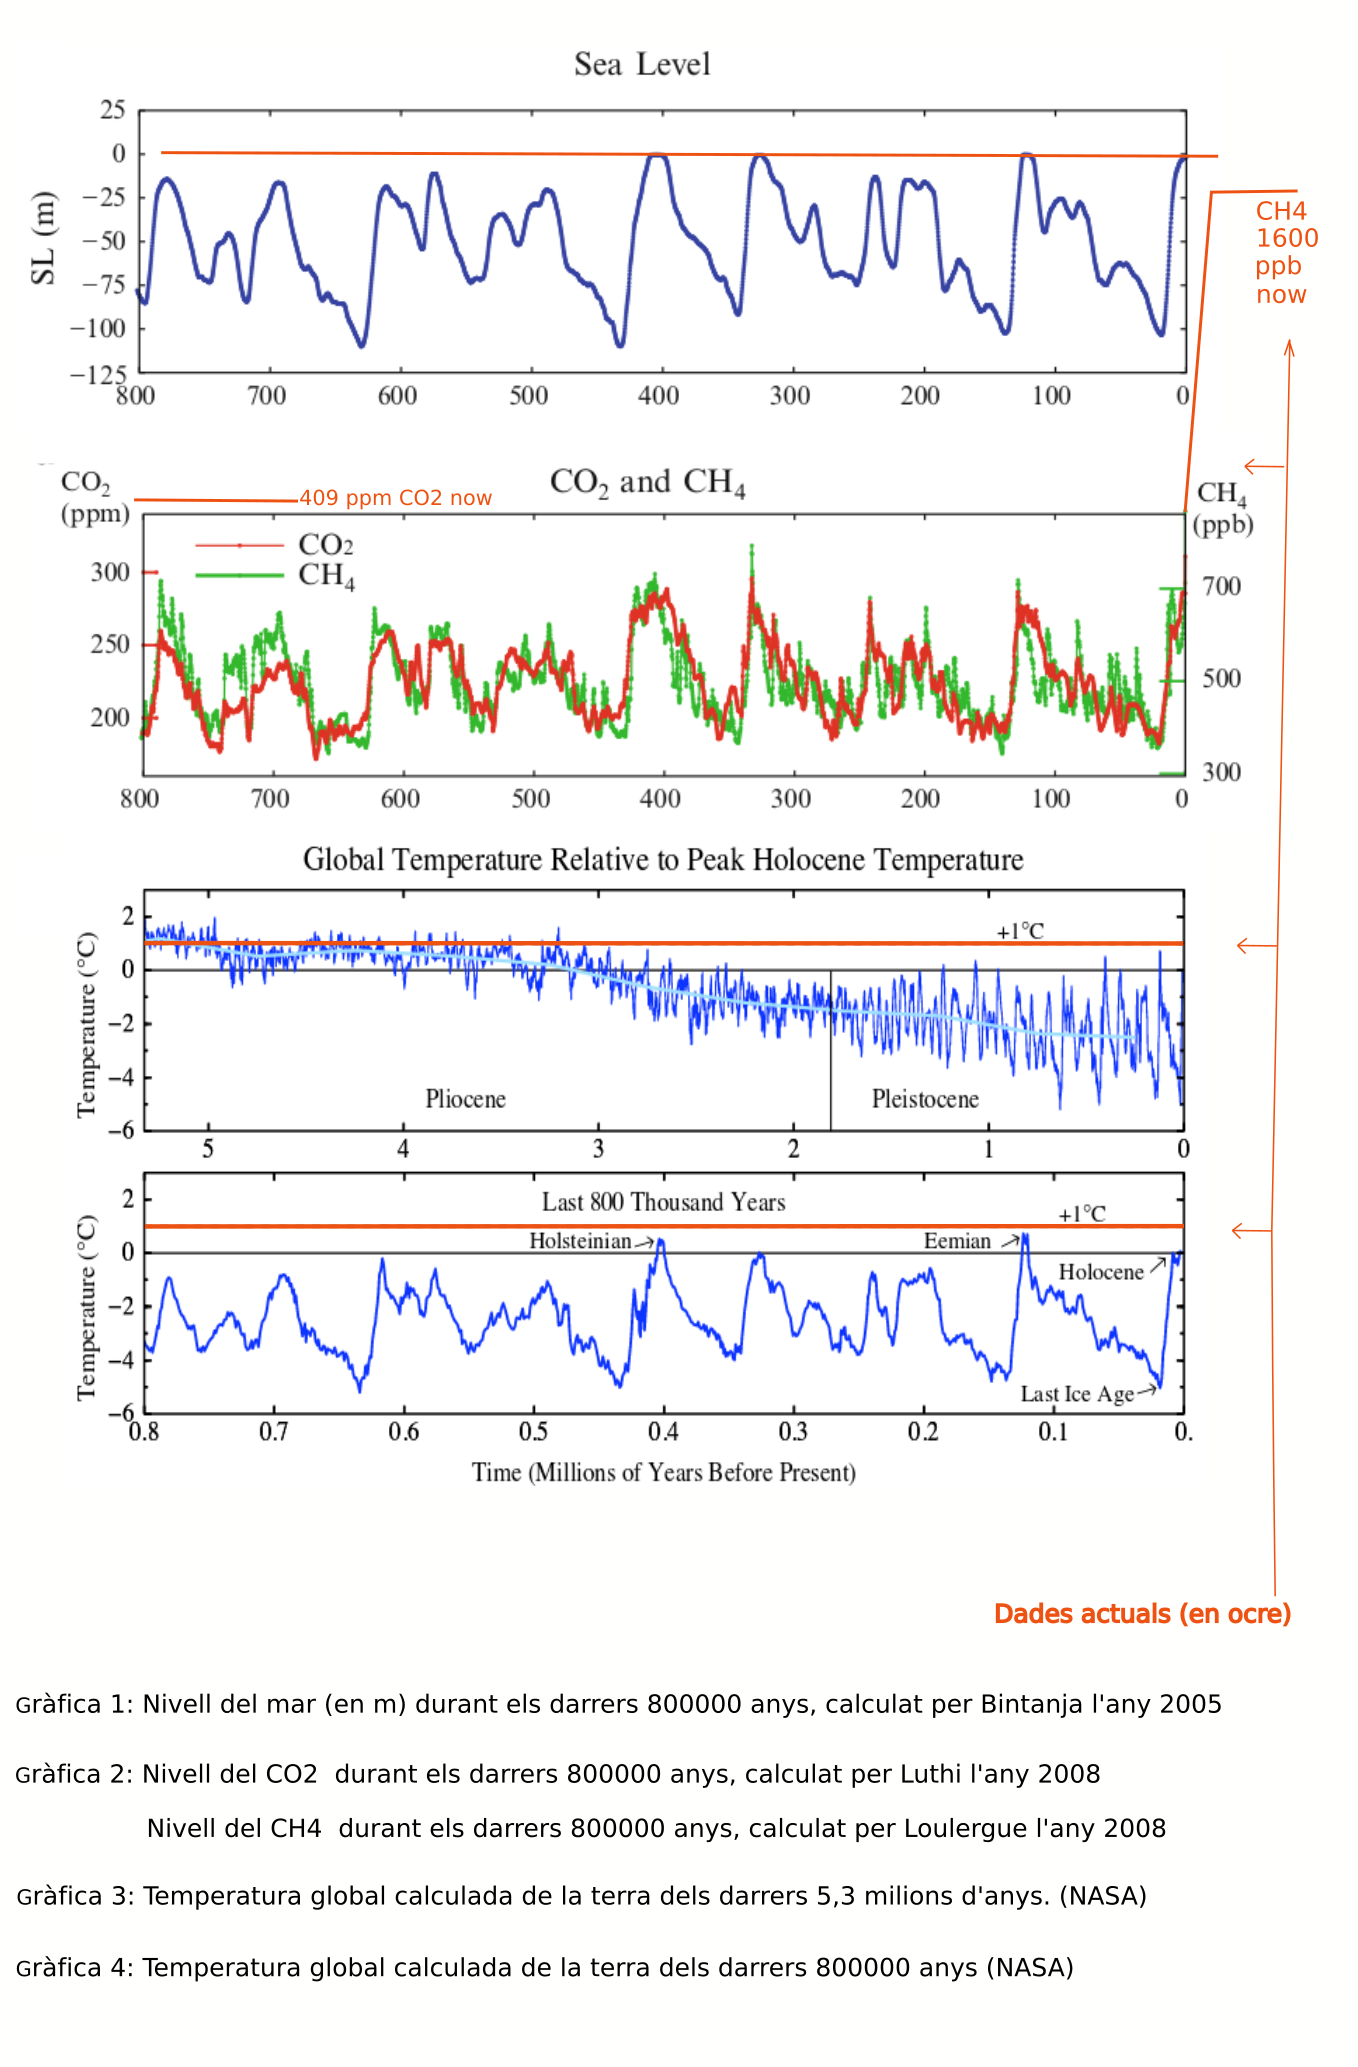 Sea Level - CO2 - CH4 and Temperature now